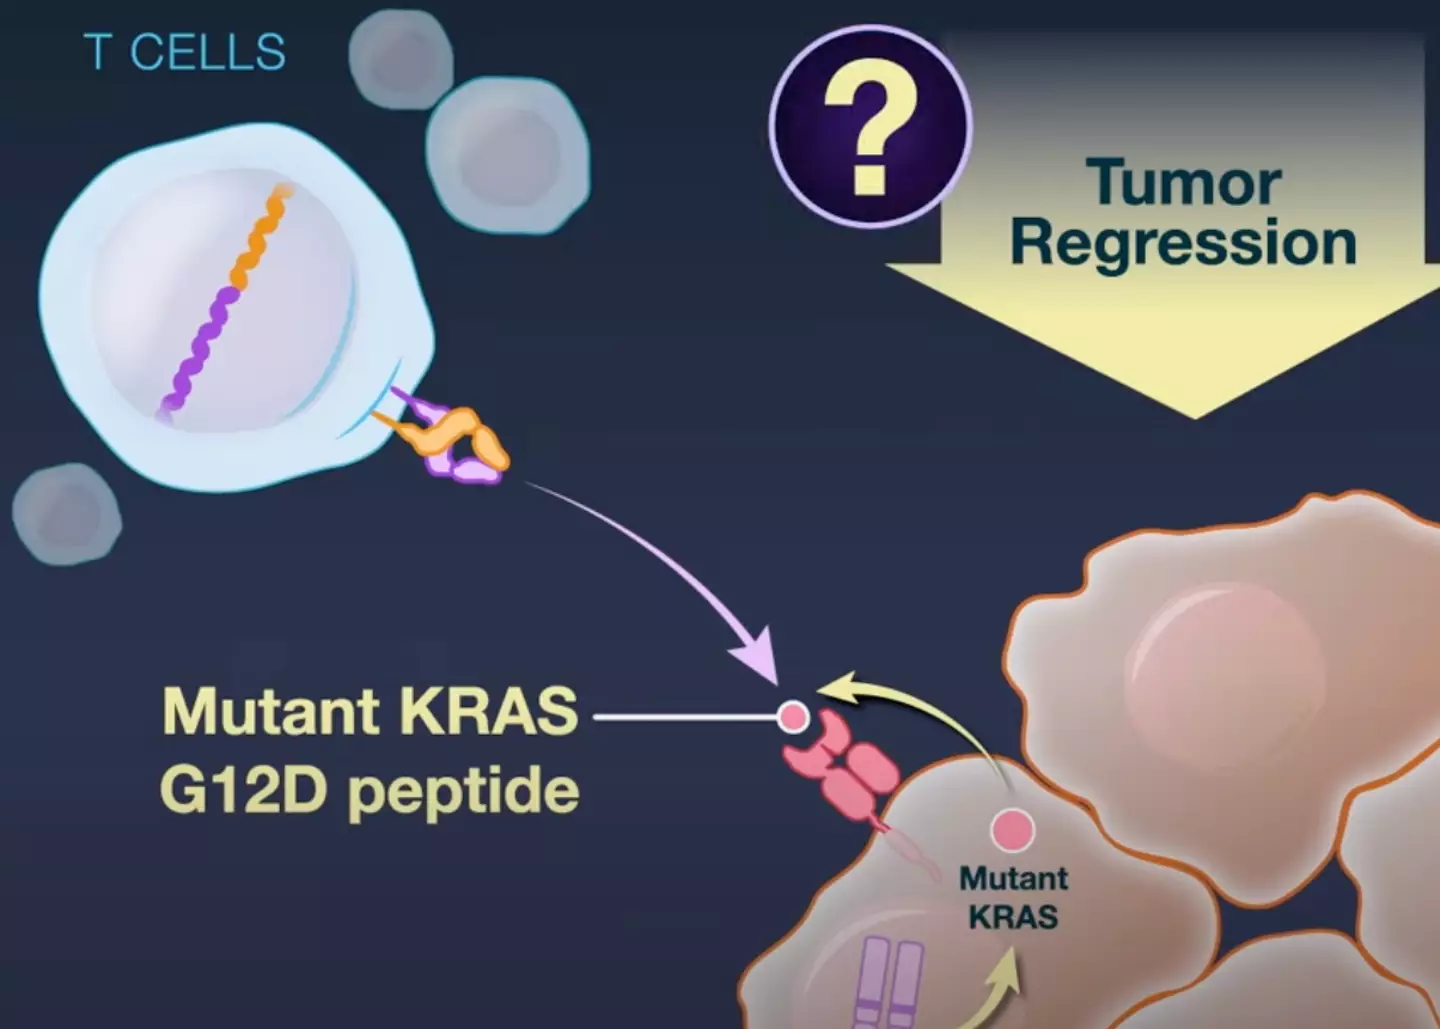 The experimental gene therapy targets a type of cancer mutation called KRAS G12D.